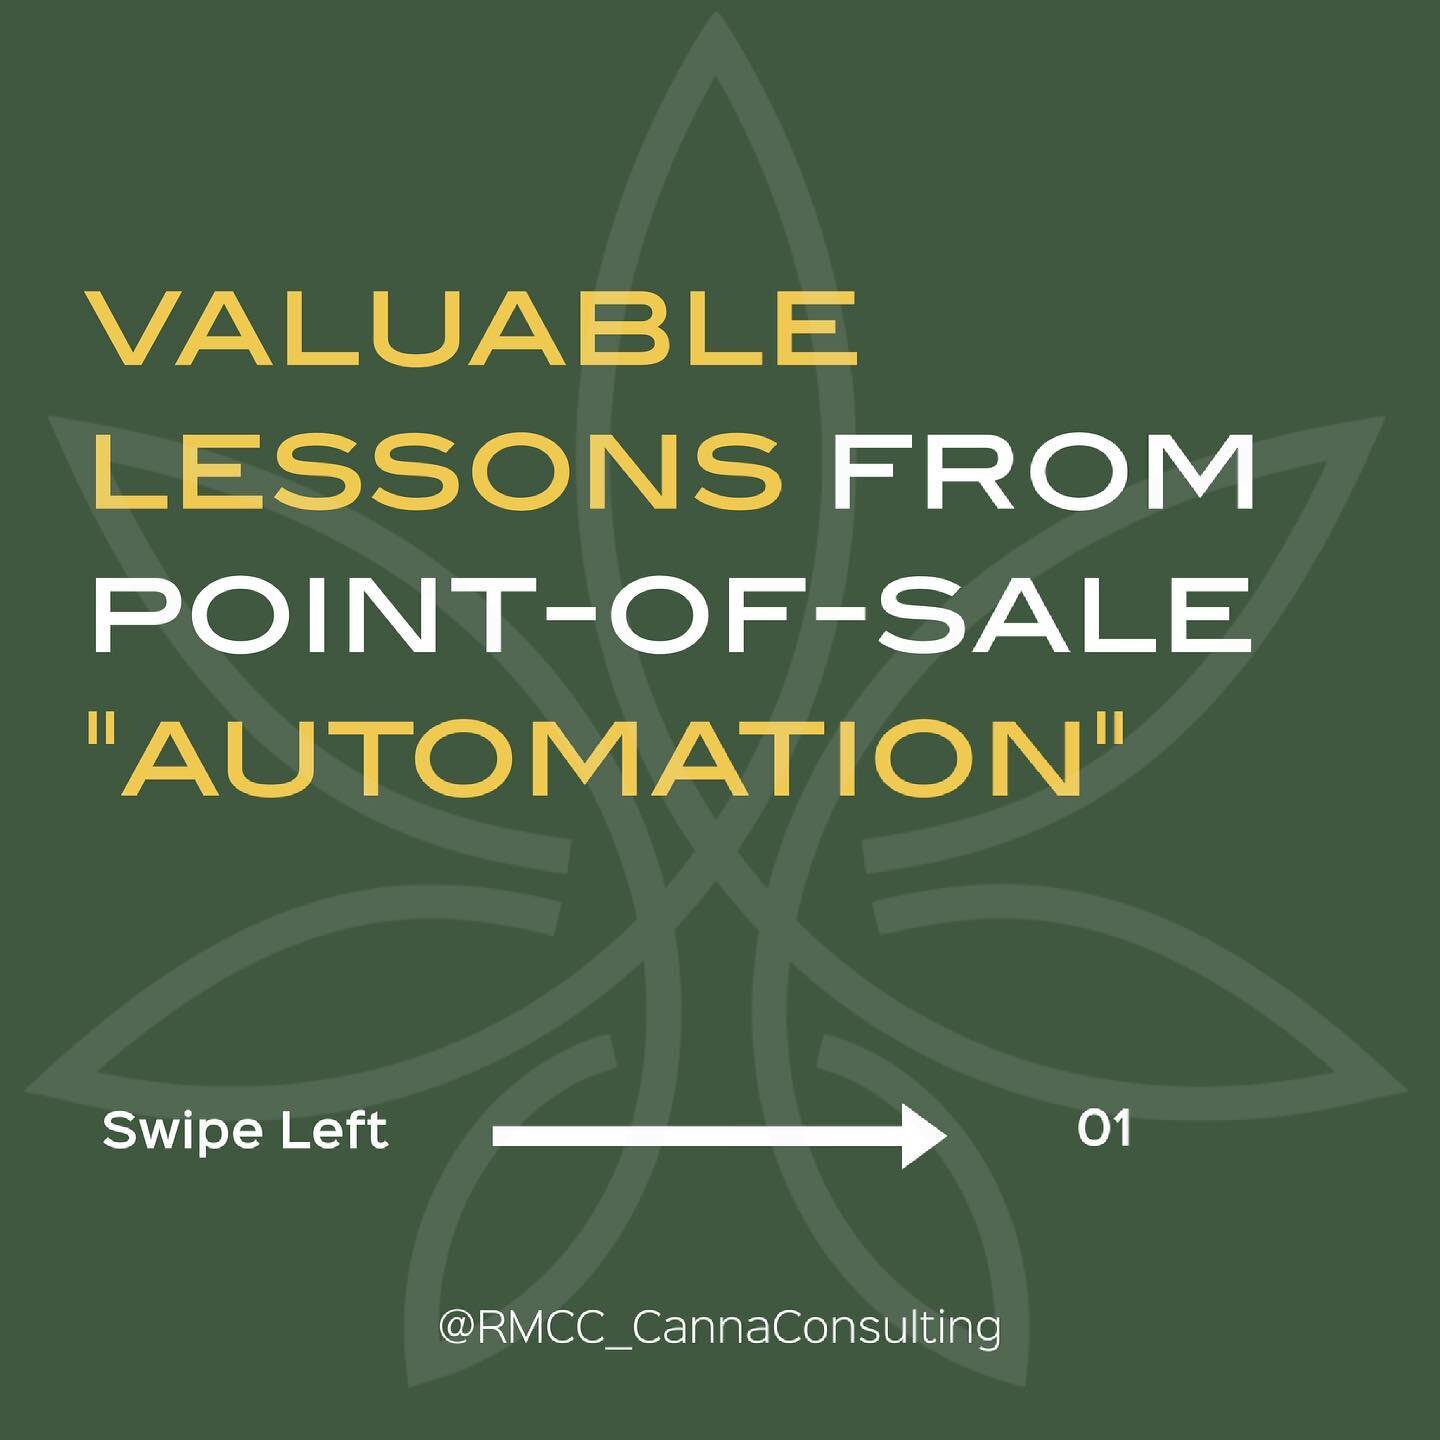 Lessons Learned from POS &quot;Automation&quot; 🥴

Expectation: A point-of-sale to automate 100% of your Metrc compliance. 

Reality: This is just not the case. 

We speak from experience, here are the most common mistakes we see when it comes to di